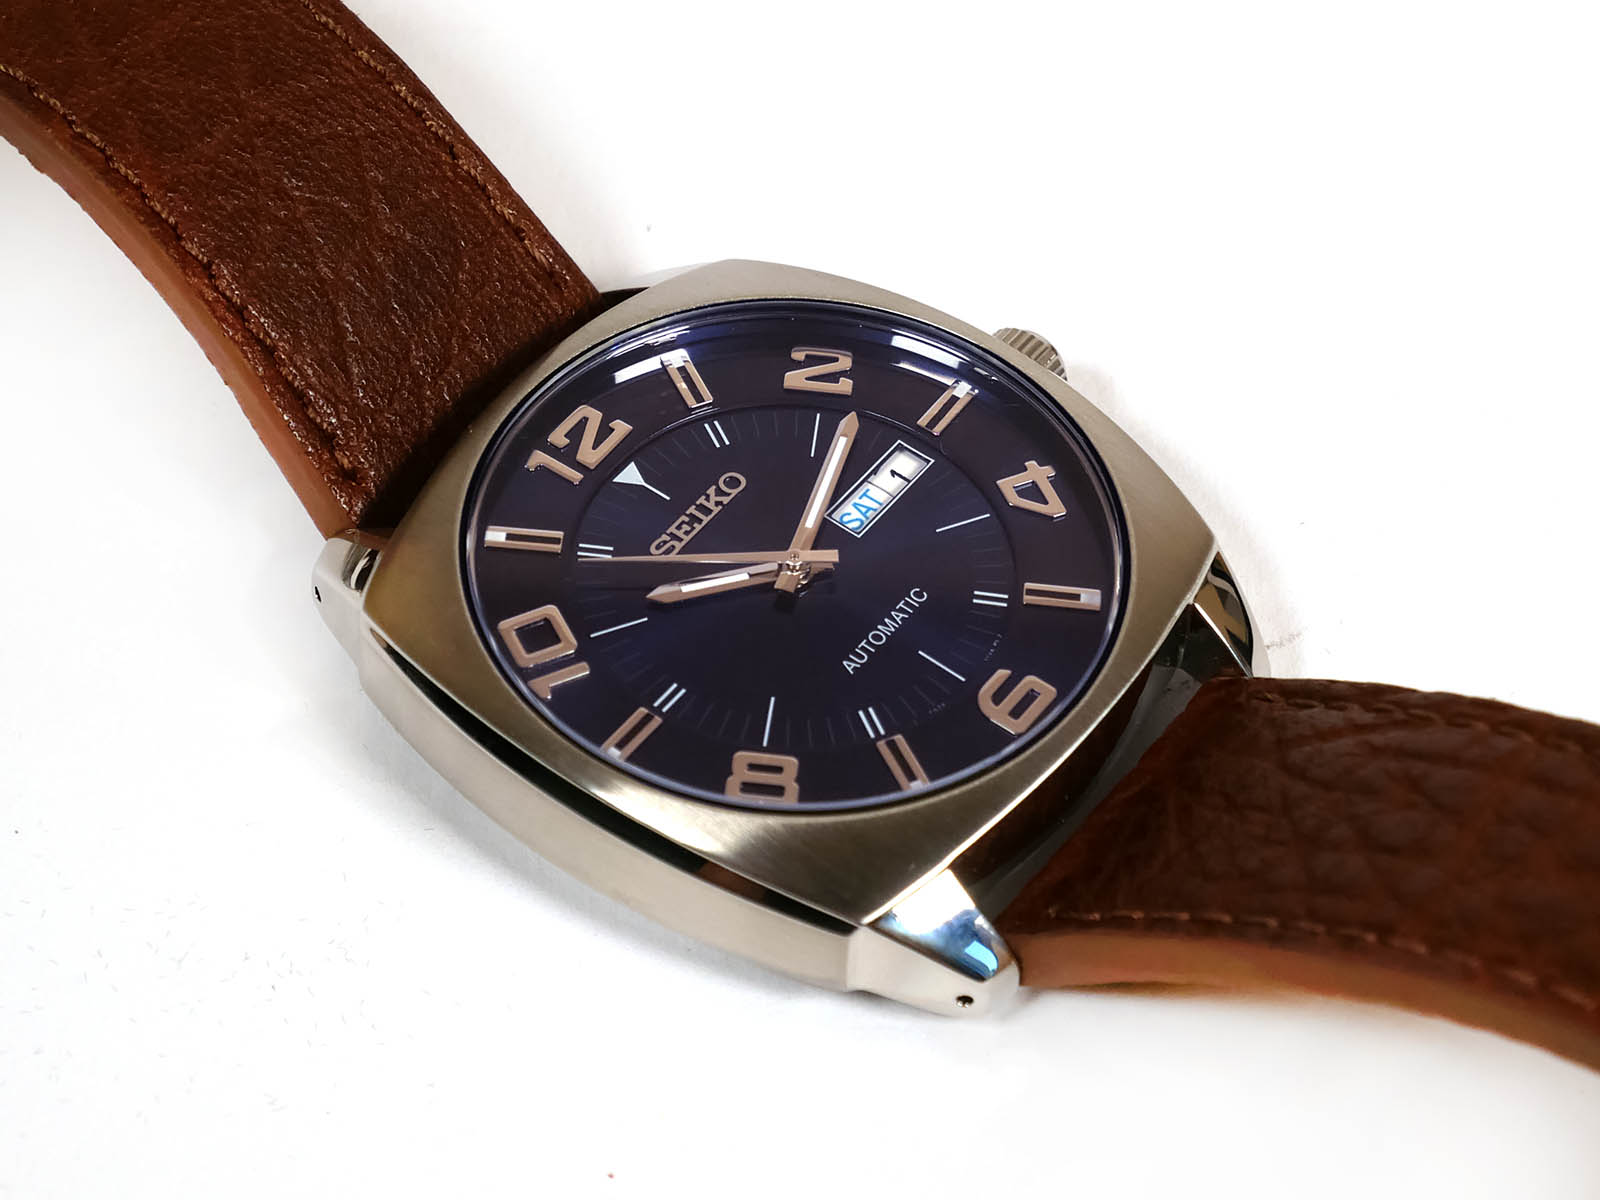 Seiko SNKN37 Recraft Stainless Steel Automatic Self-Wind Watch with Brown  Leather Band_06